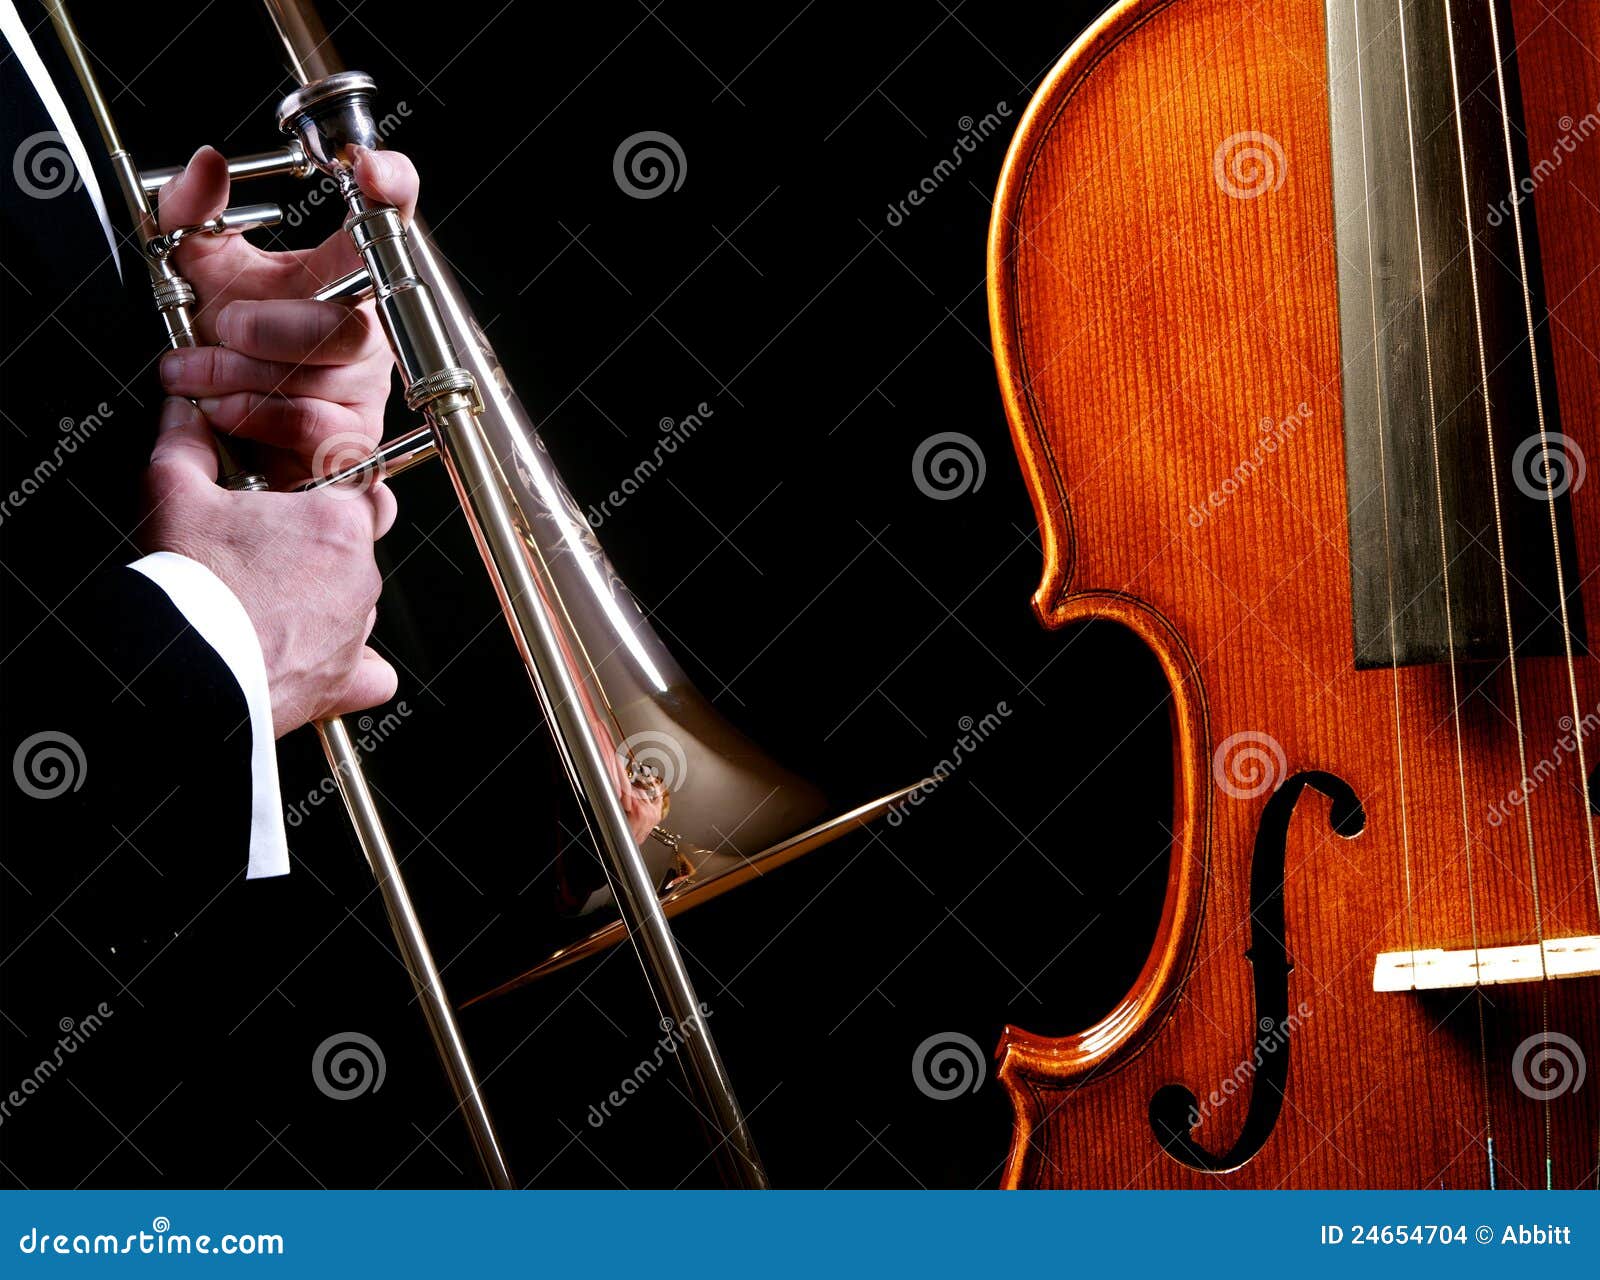 brass and stringed instruments